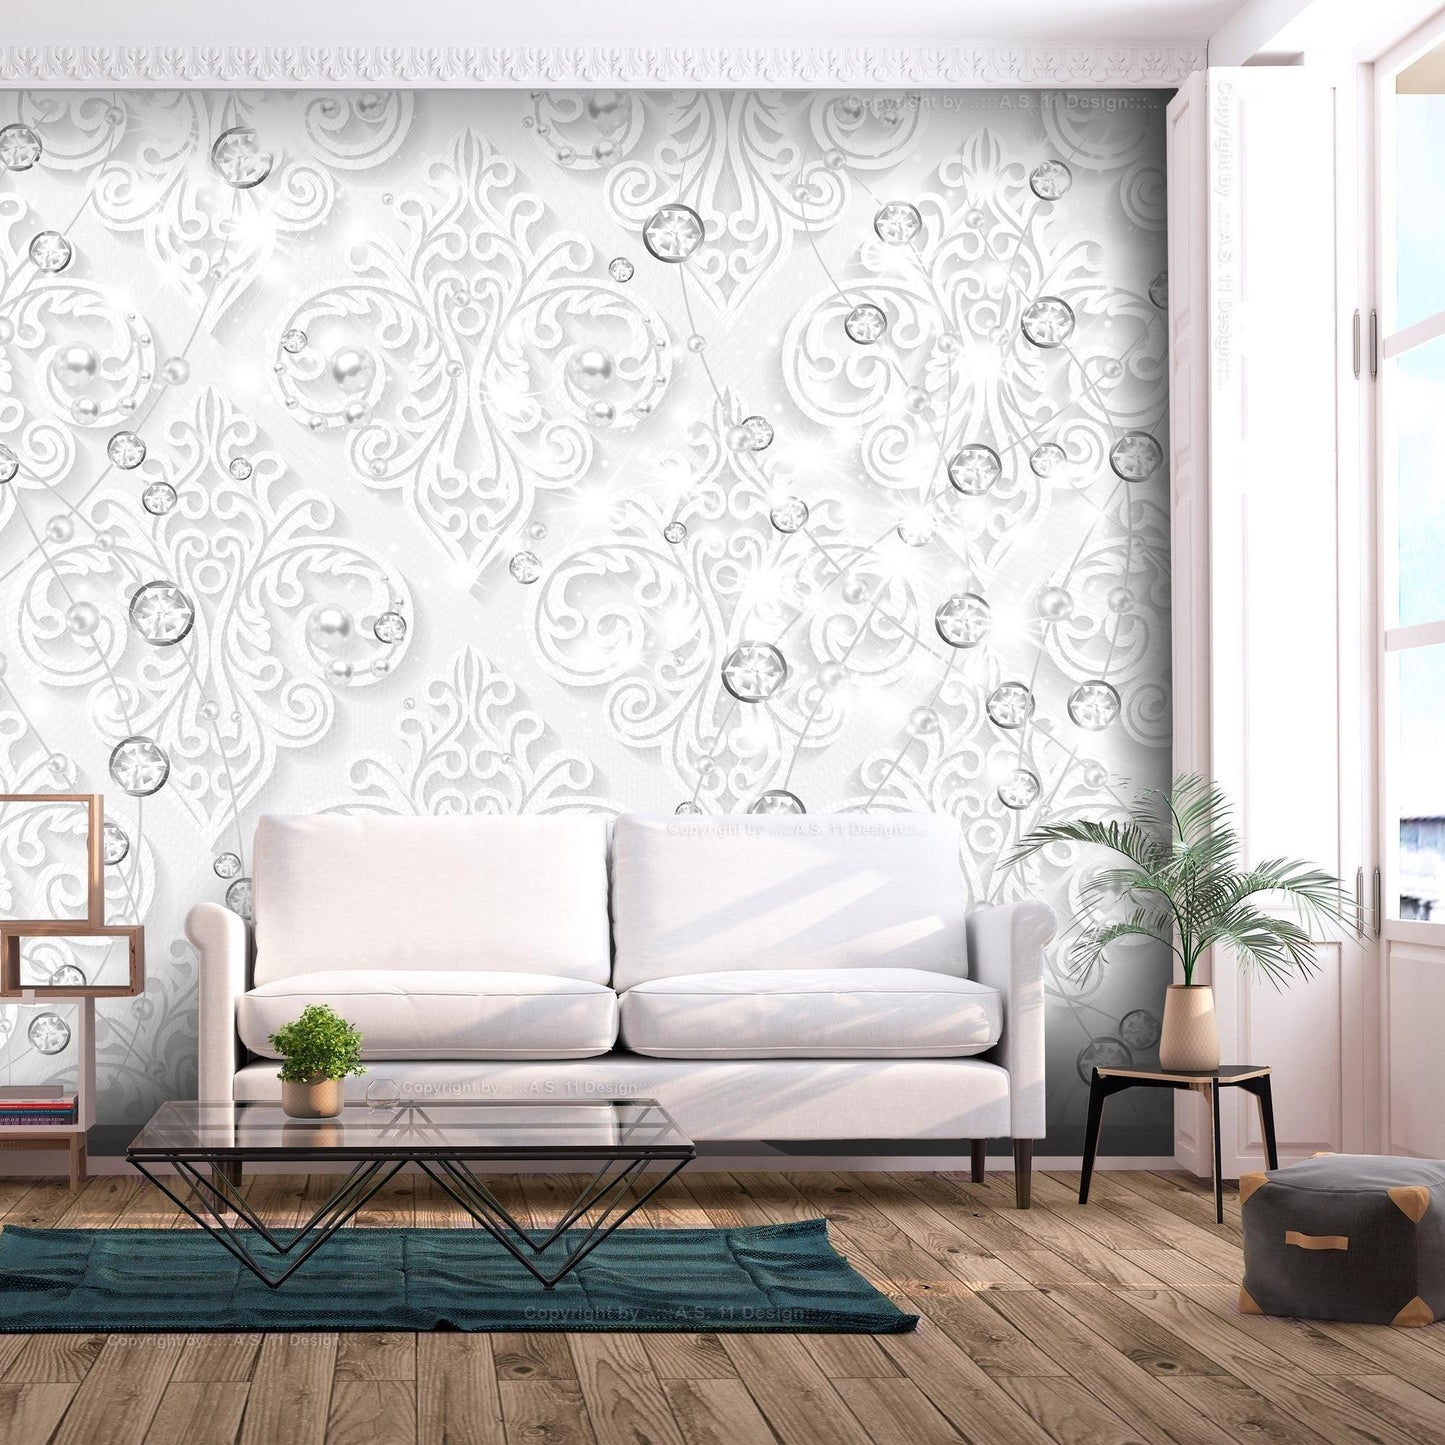 Peel and stick wall mural - Ornaments with Diamonds - www.trendingbestsellers.com